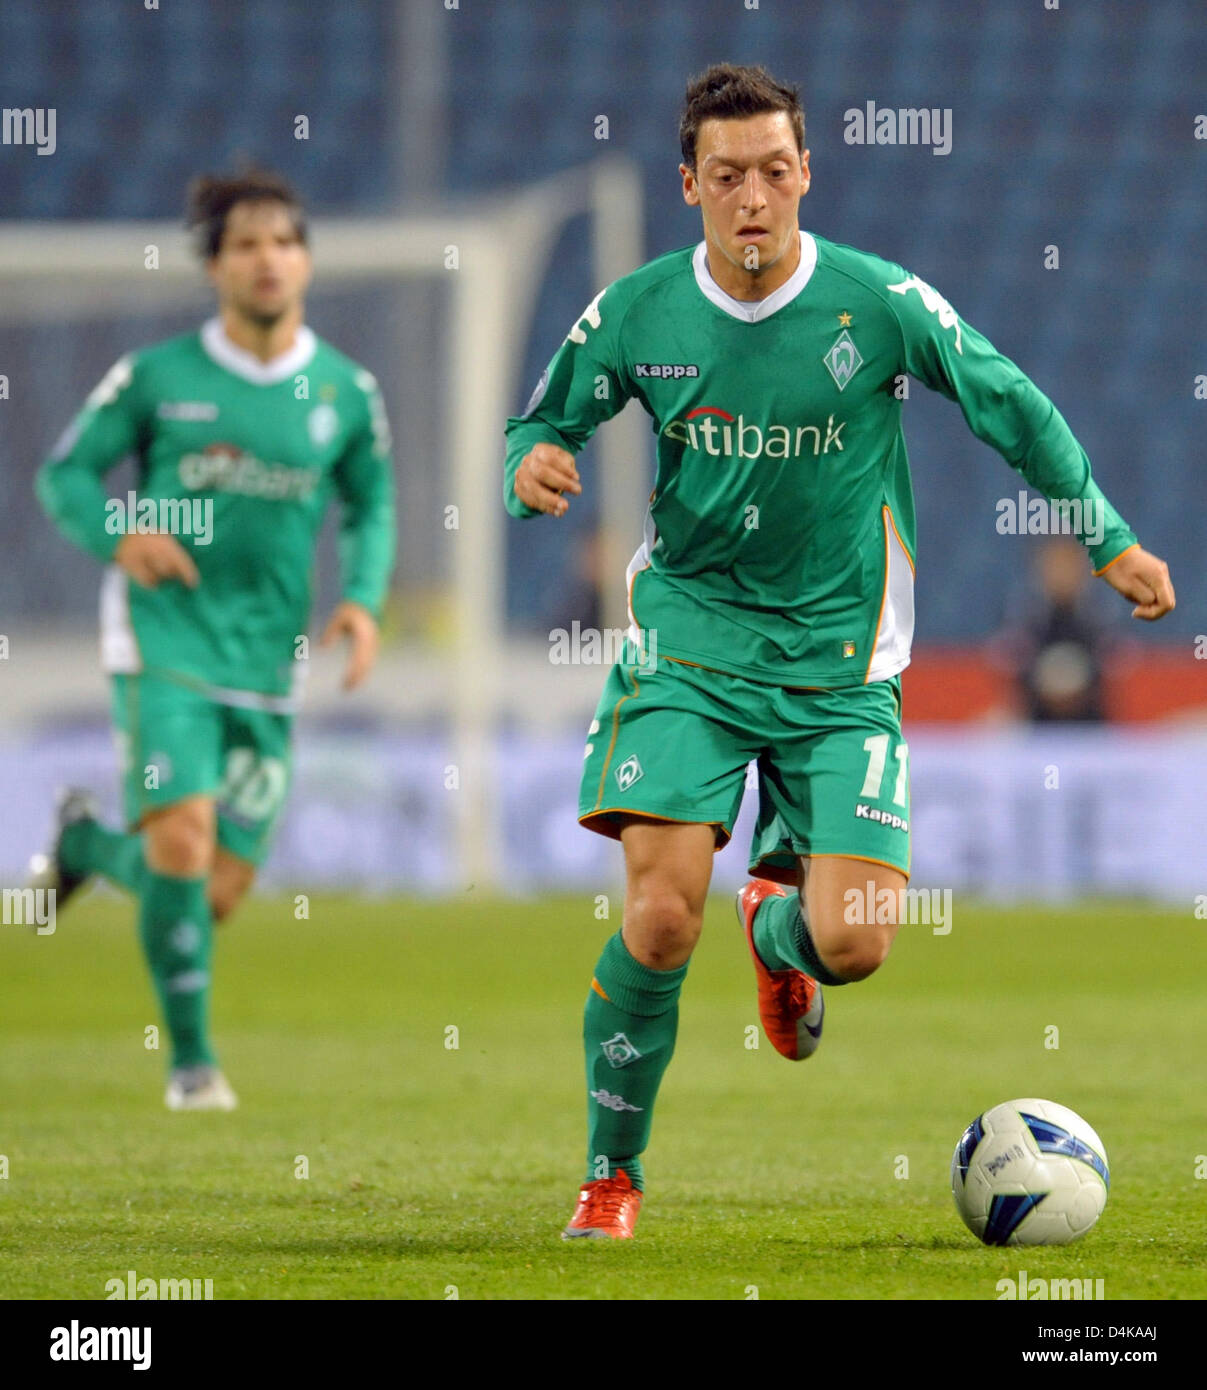 Bremen?s Mesut Oezil controls the ball during the UEFA Cup quarter finals second leg match Udinese vs Werder Bremen at Stadio Friuli in Udine, Italy, 16 April 2009. The match tied 3-3. Photo: Carmen Jaspersen Stock Photo